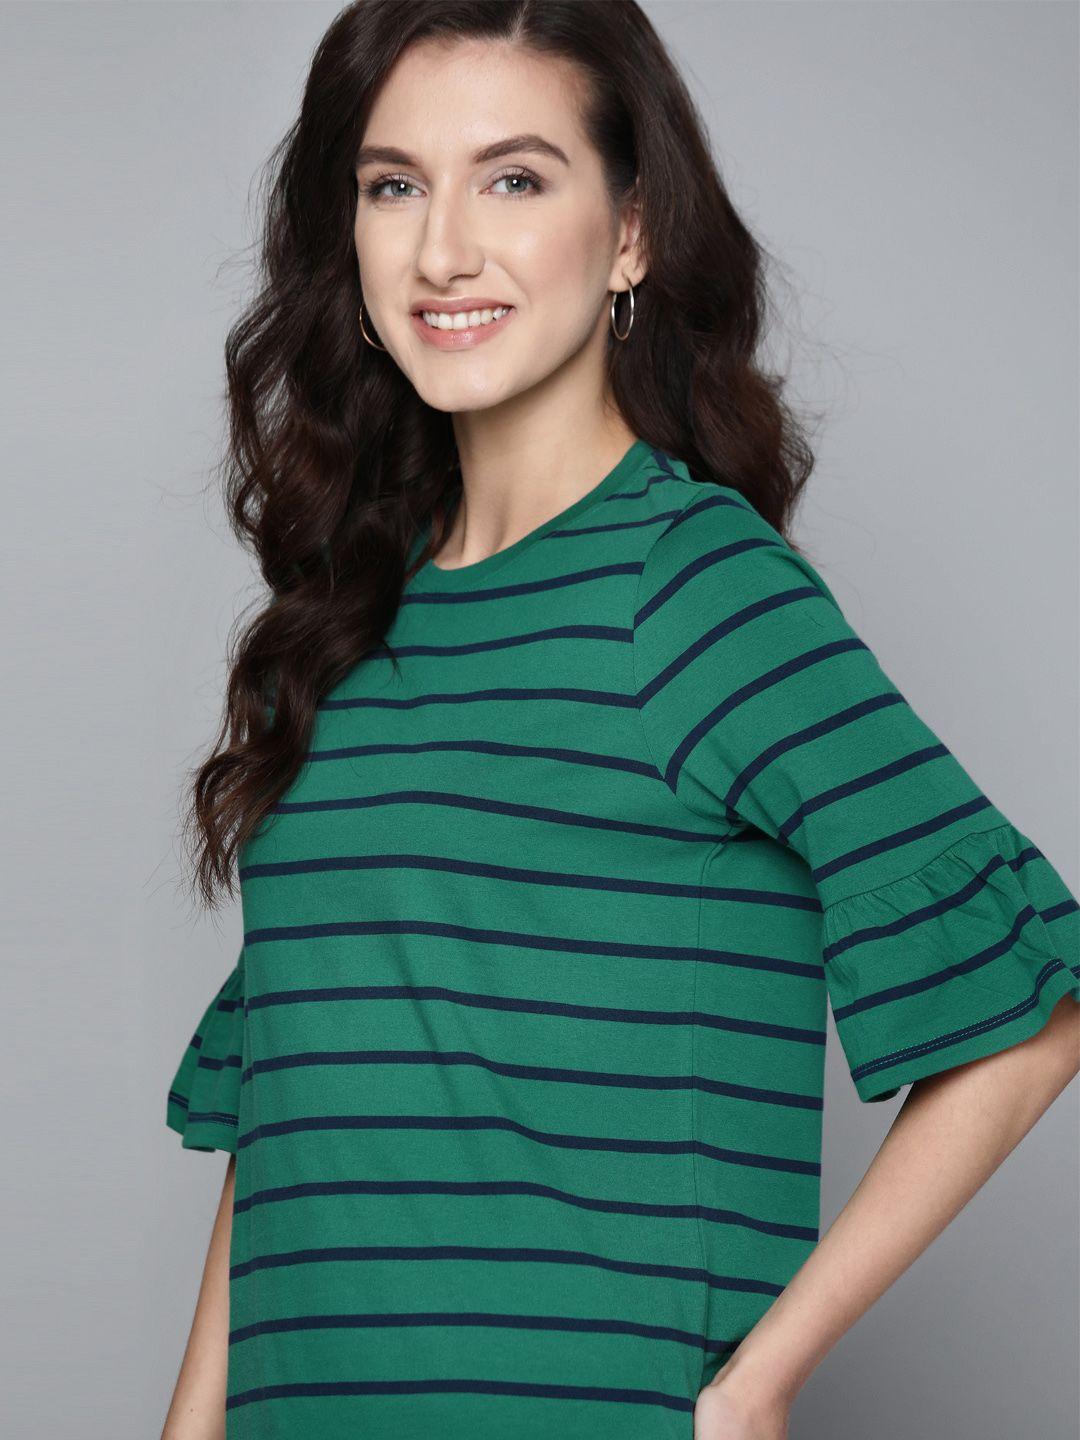 mast-&-harbour-women-green-&-navy-blue-pure-cotton-relaxed-fit-bell-sleeved-striped-top